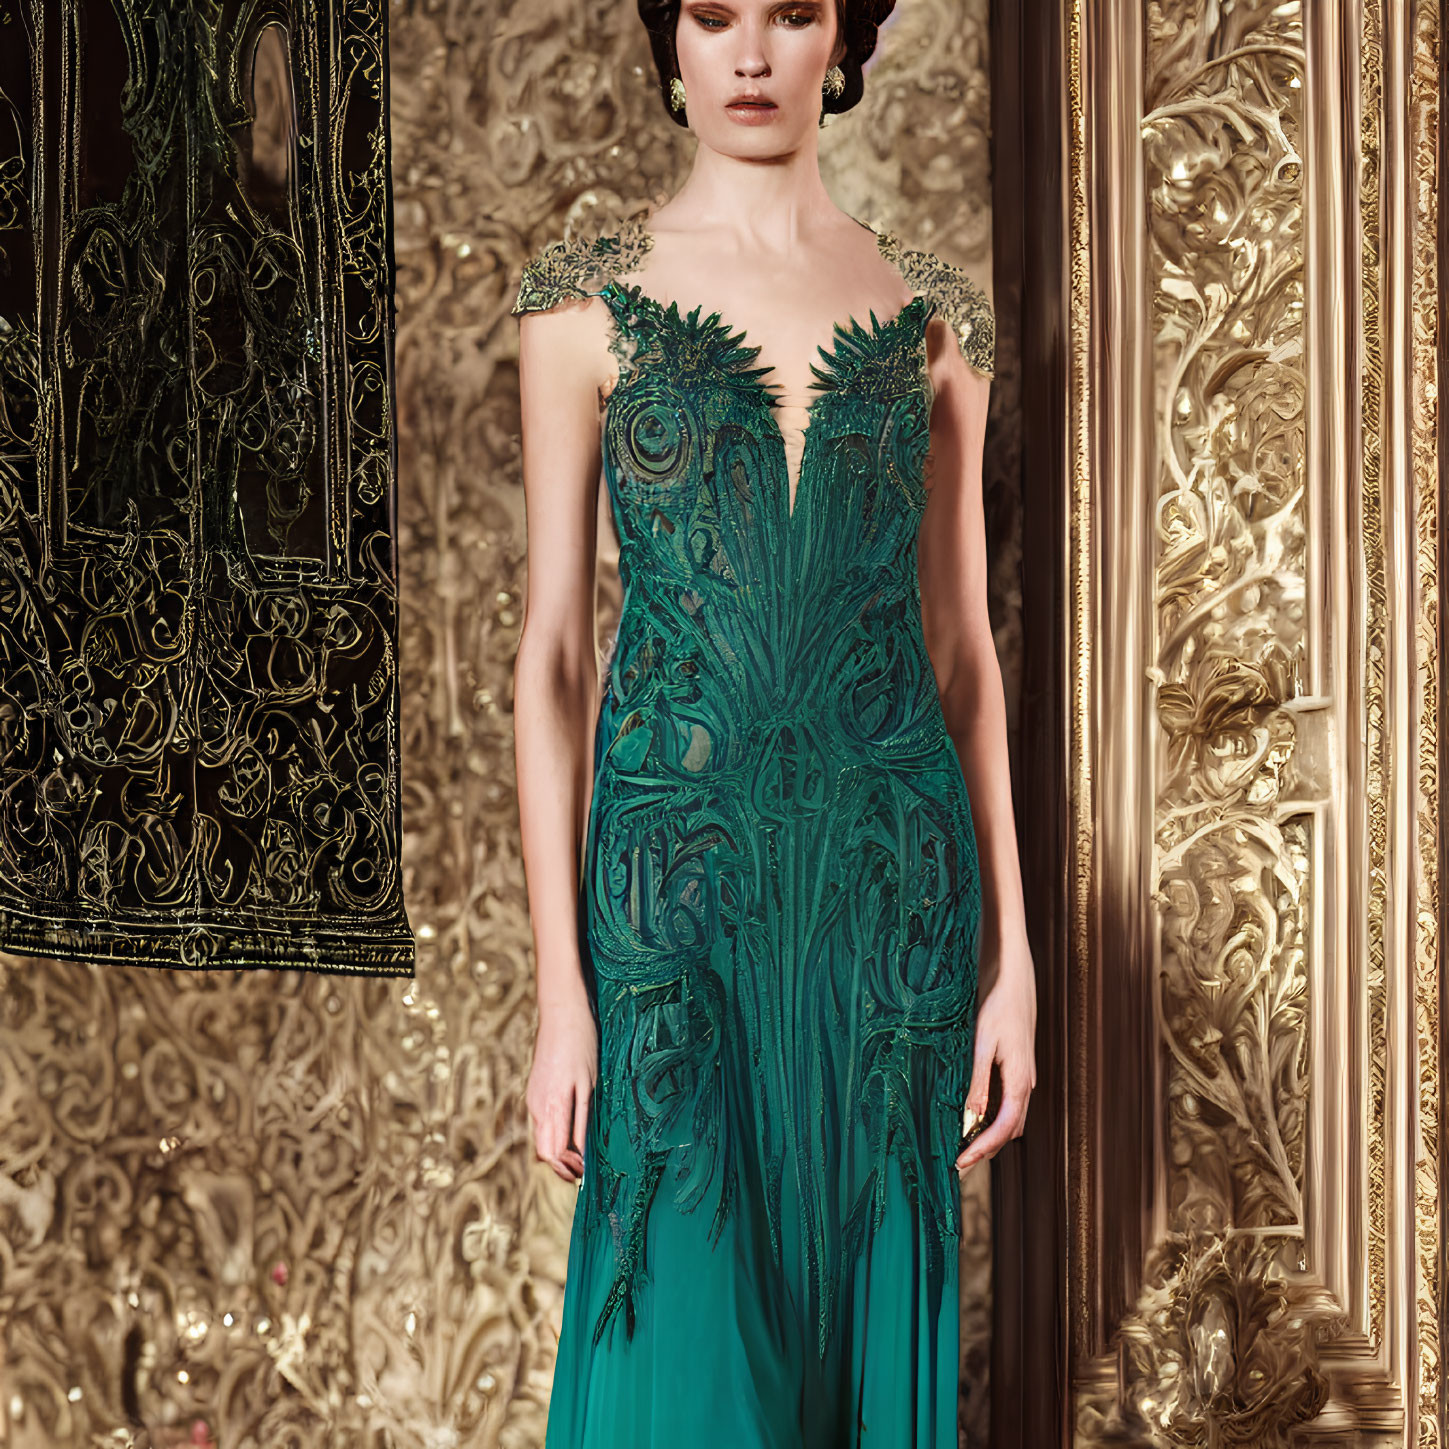 Elegant woman in green dress by ornate golden mirrors